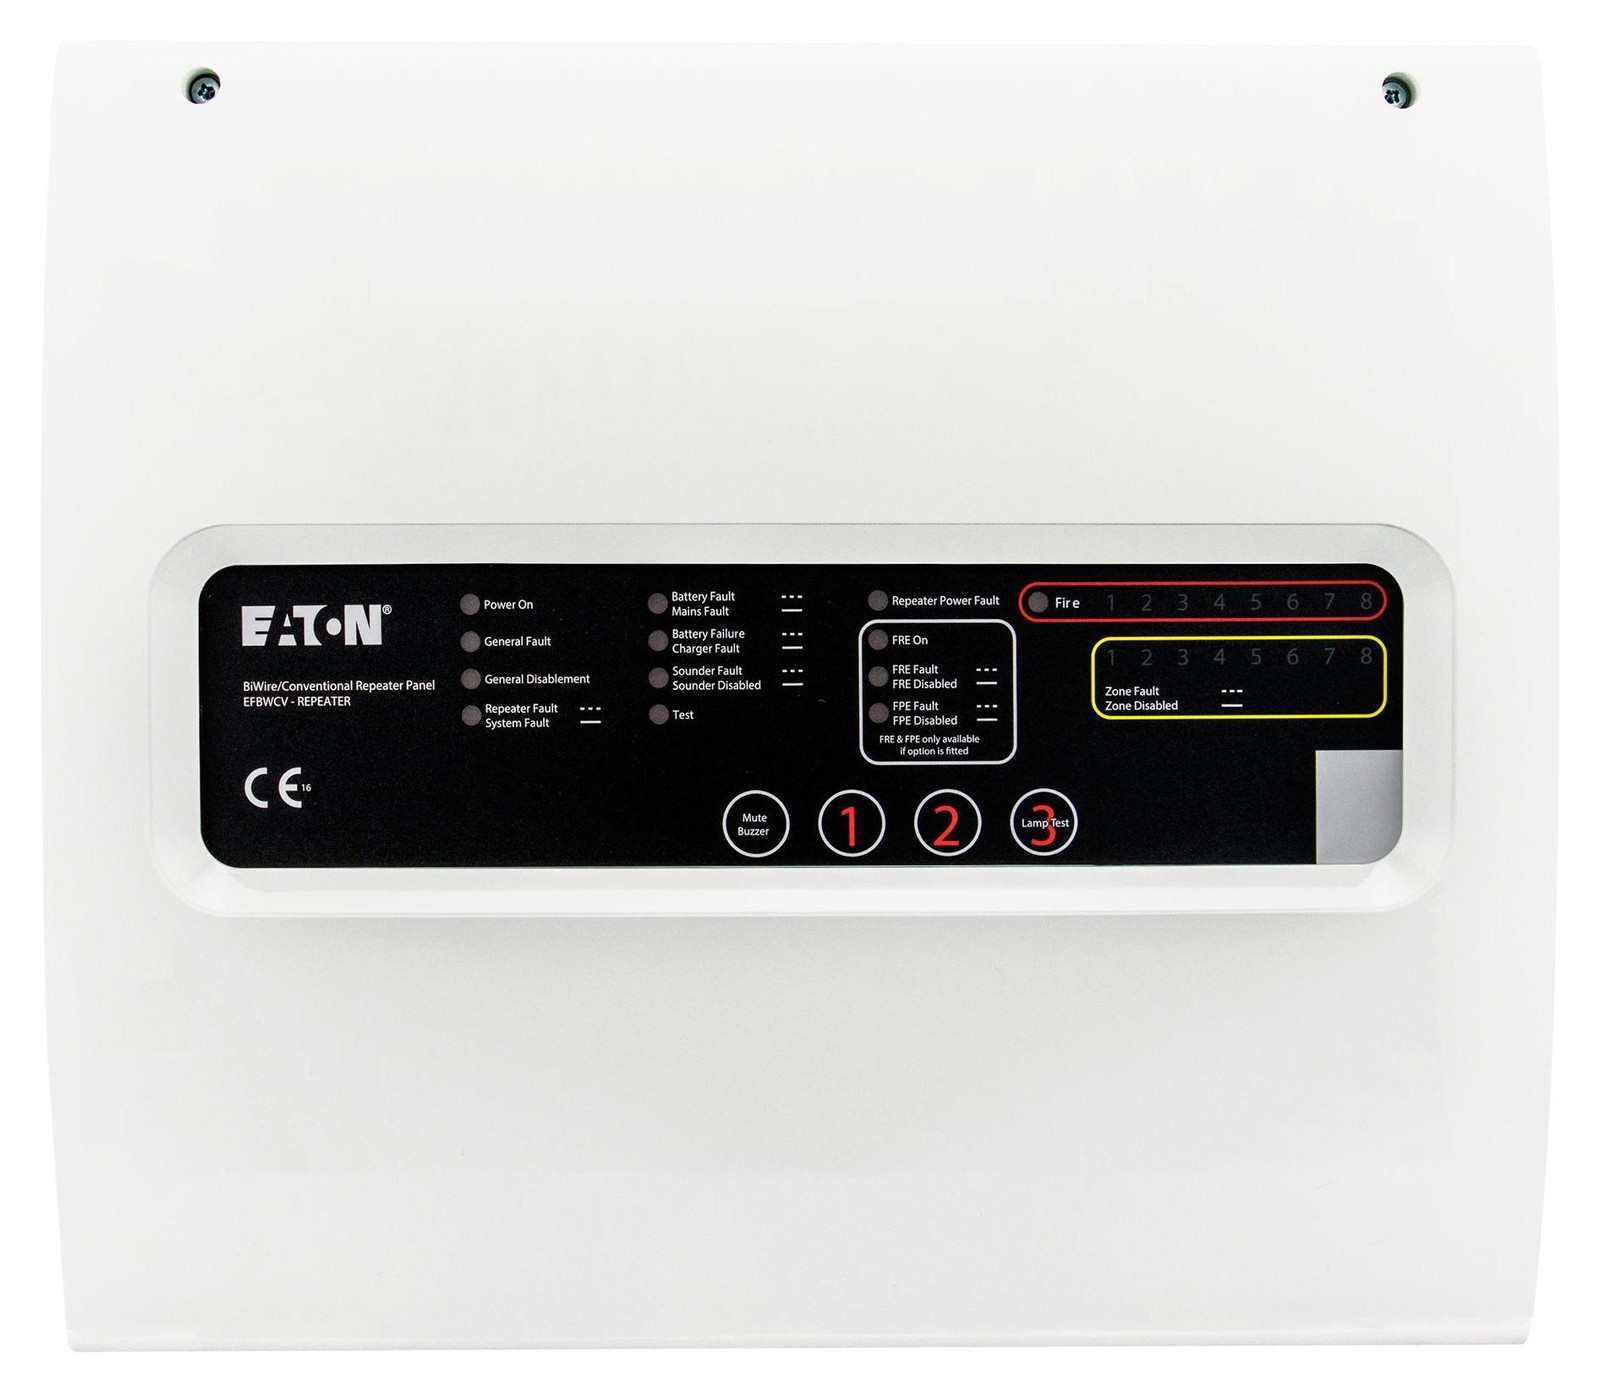 Fulleon Efbwcv-Repeater Biwire And Conventional Repeater Panel